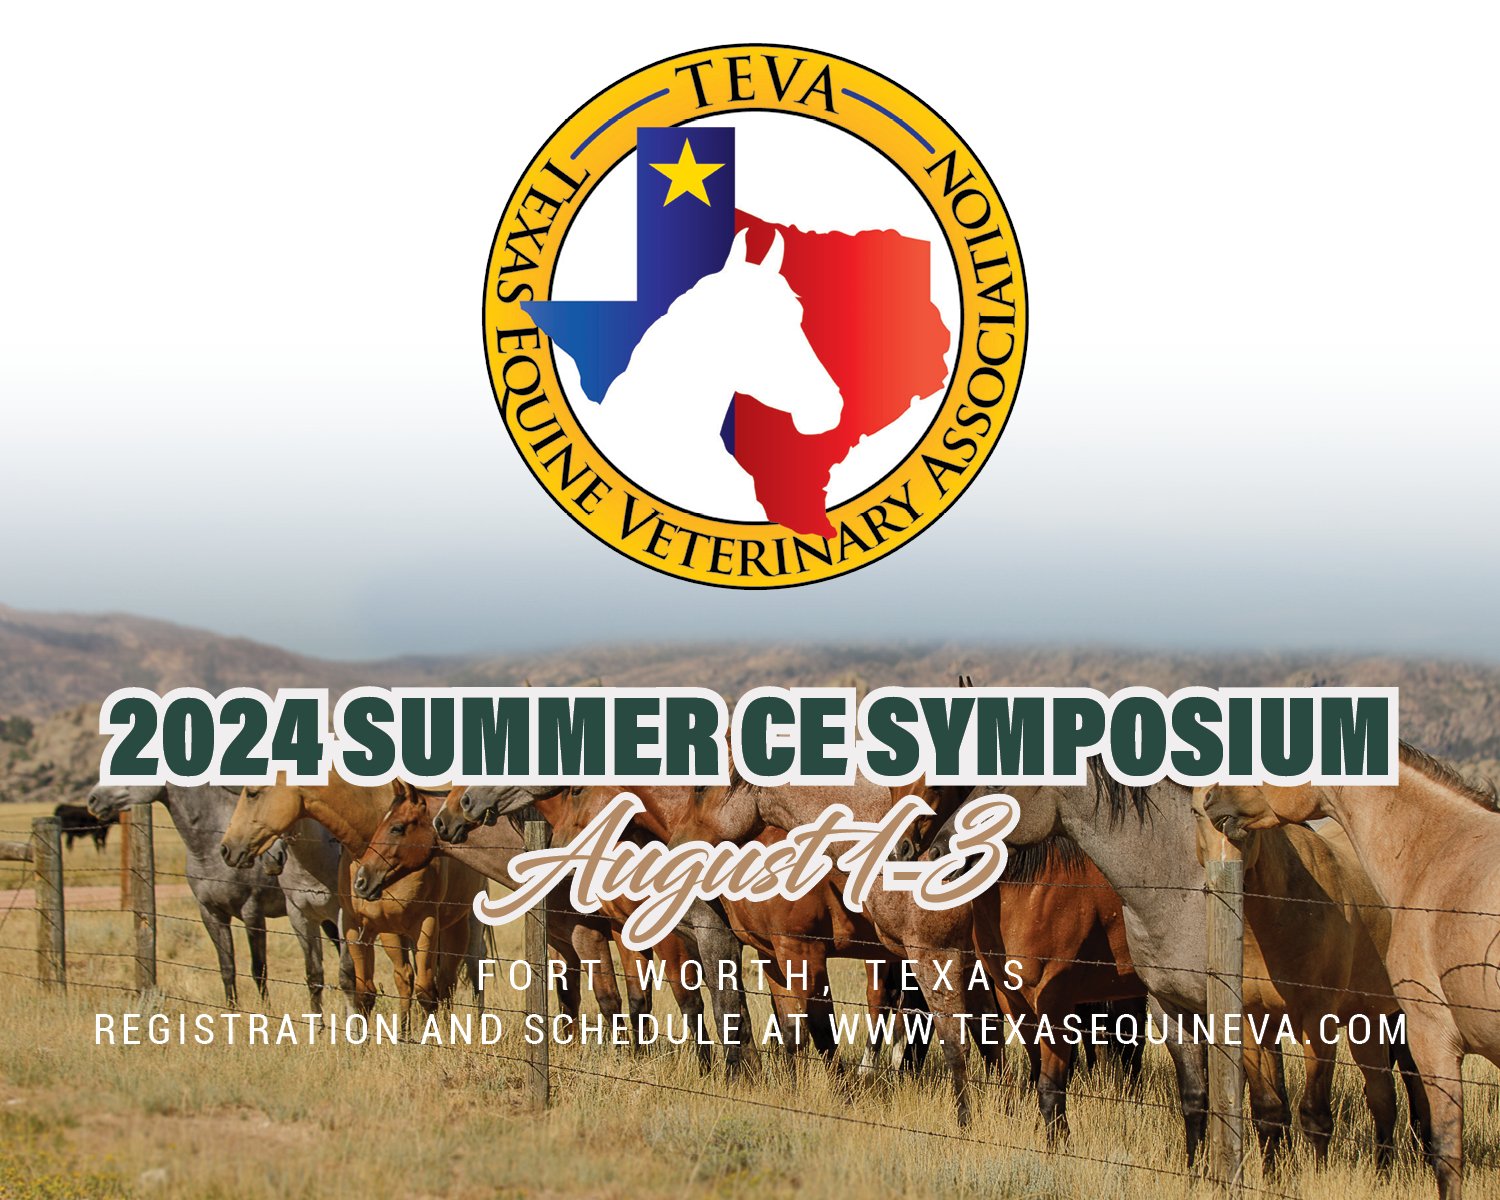 SUMMER CE SYMPOSIUM REGISTRATION IS NOW OPEN! 
📣 Remember, you must have an active TEVA membership to access to registration rates. 
📣 Wet Labs are limited in size and first-come-first-served so sign up early!
📣 MG Biologics TEVA GOLF Tournament w